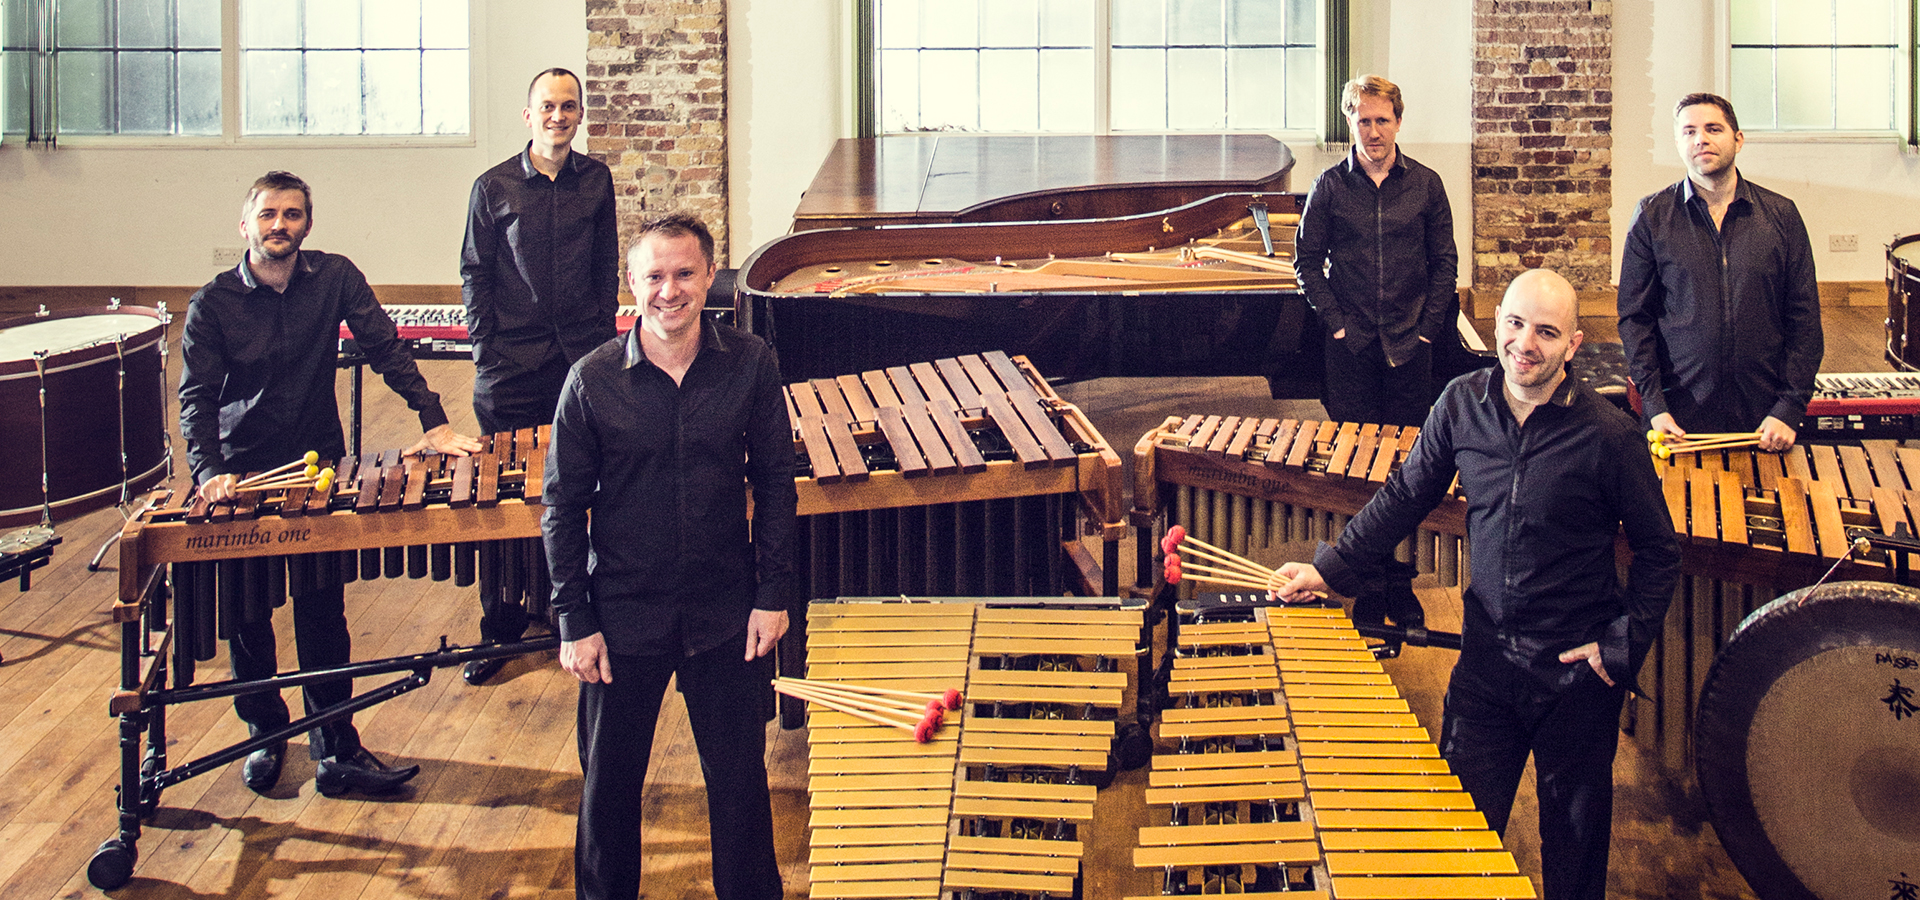 Colin Currie Group photographed with instruments